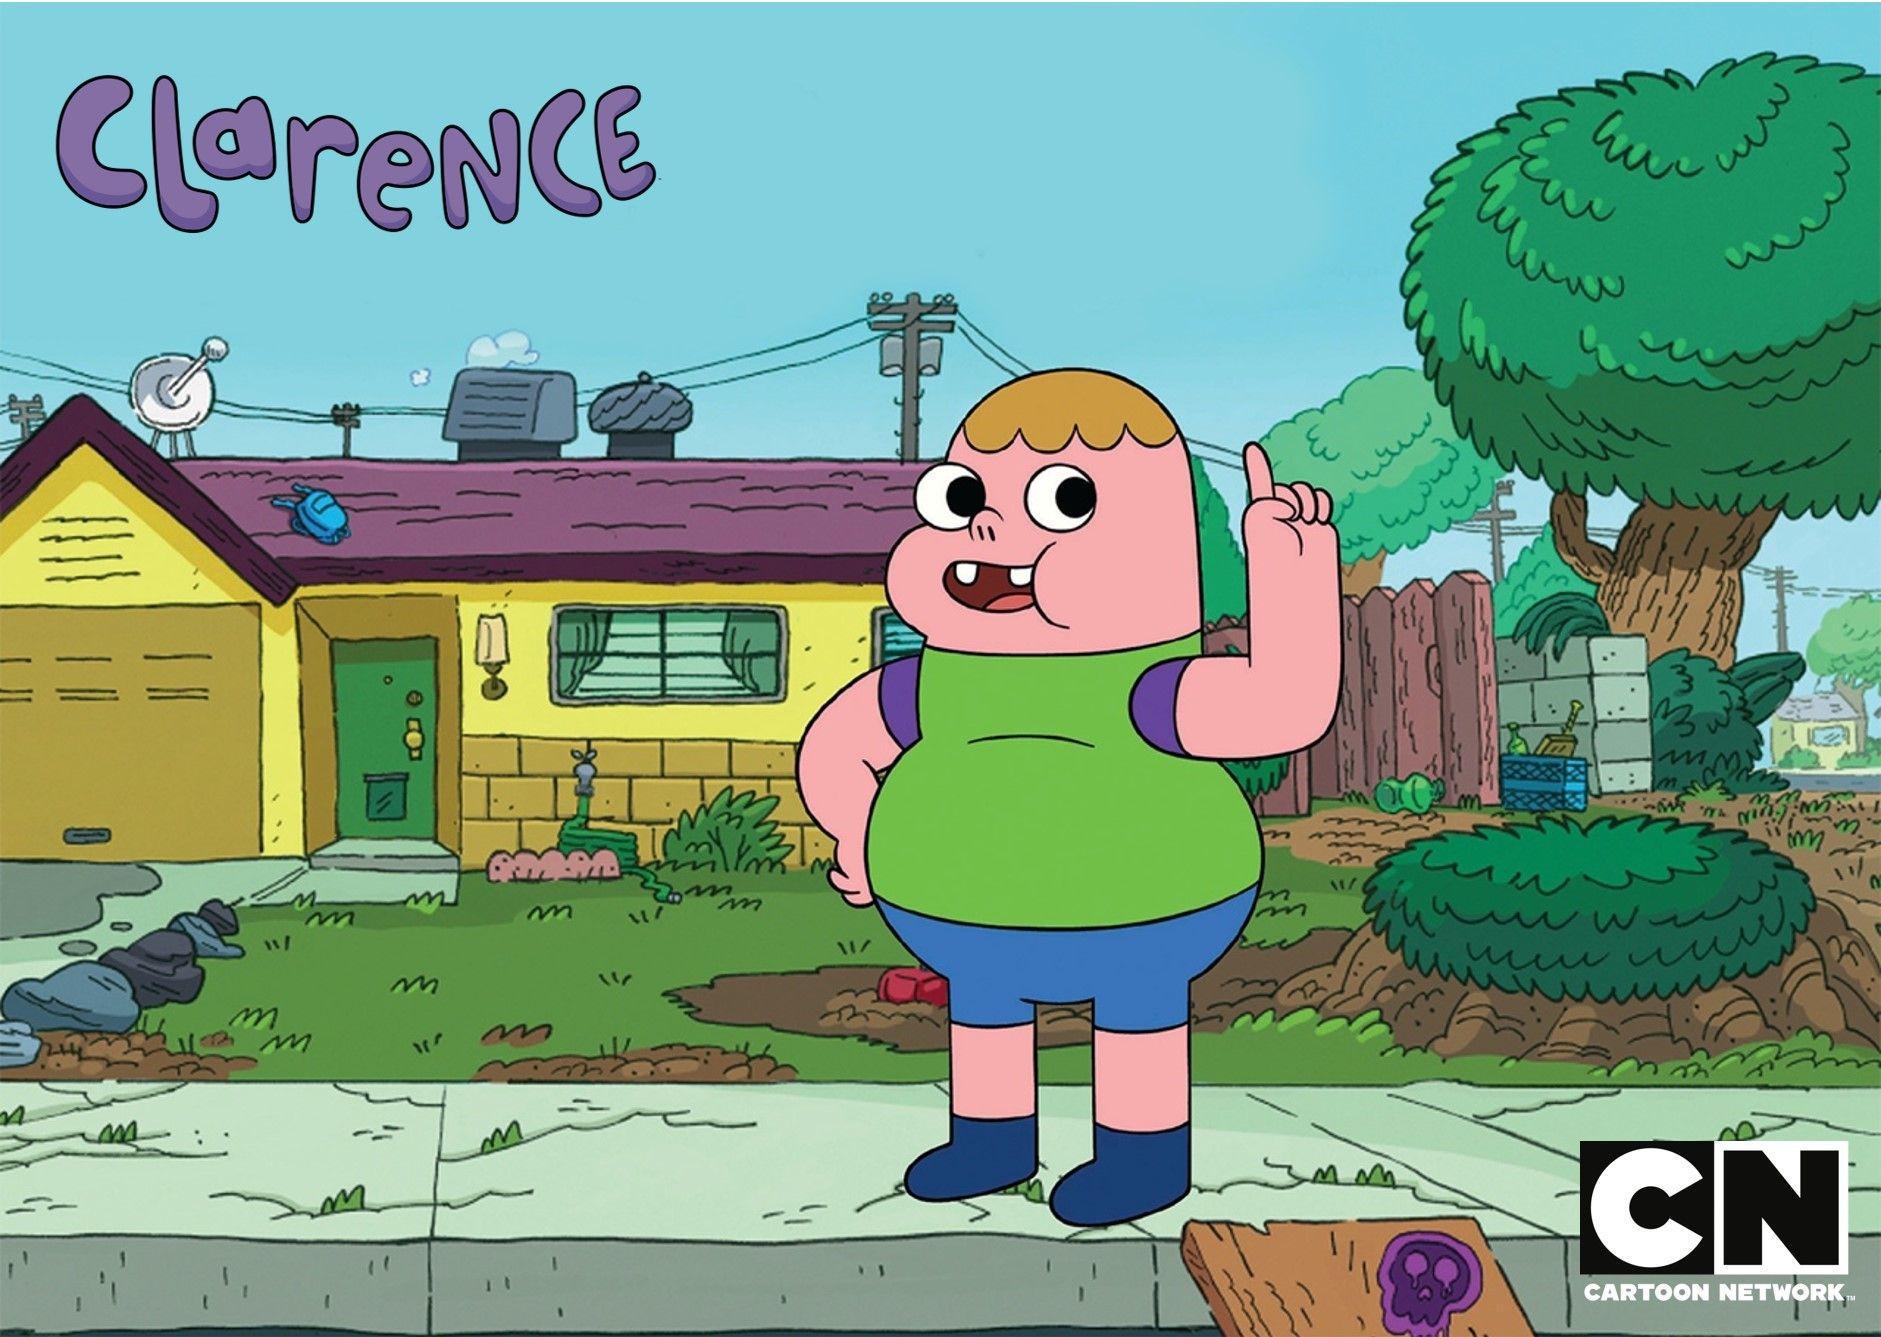 Clarence Cartoon Network HD Resolutions Wallpaper, Free